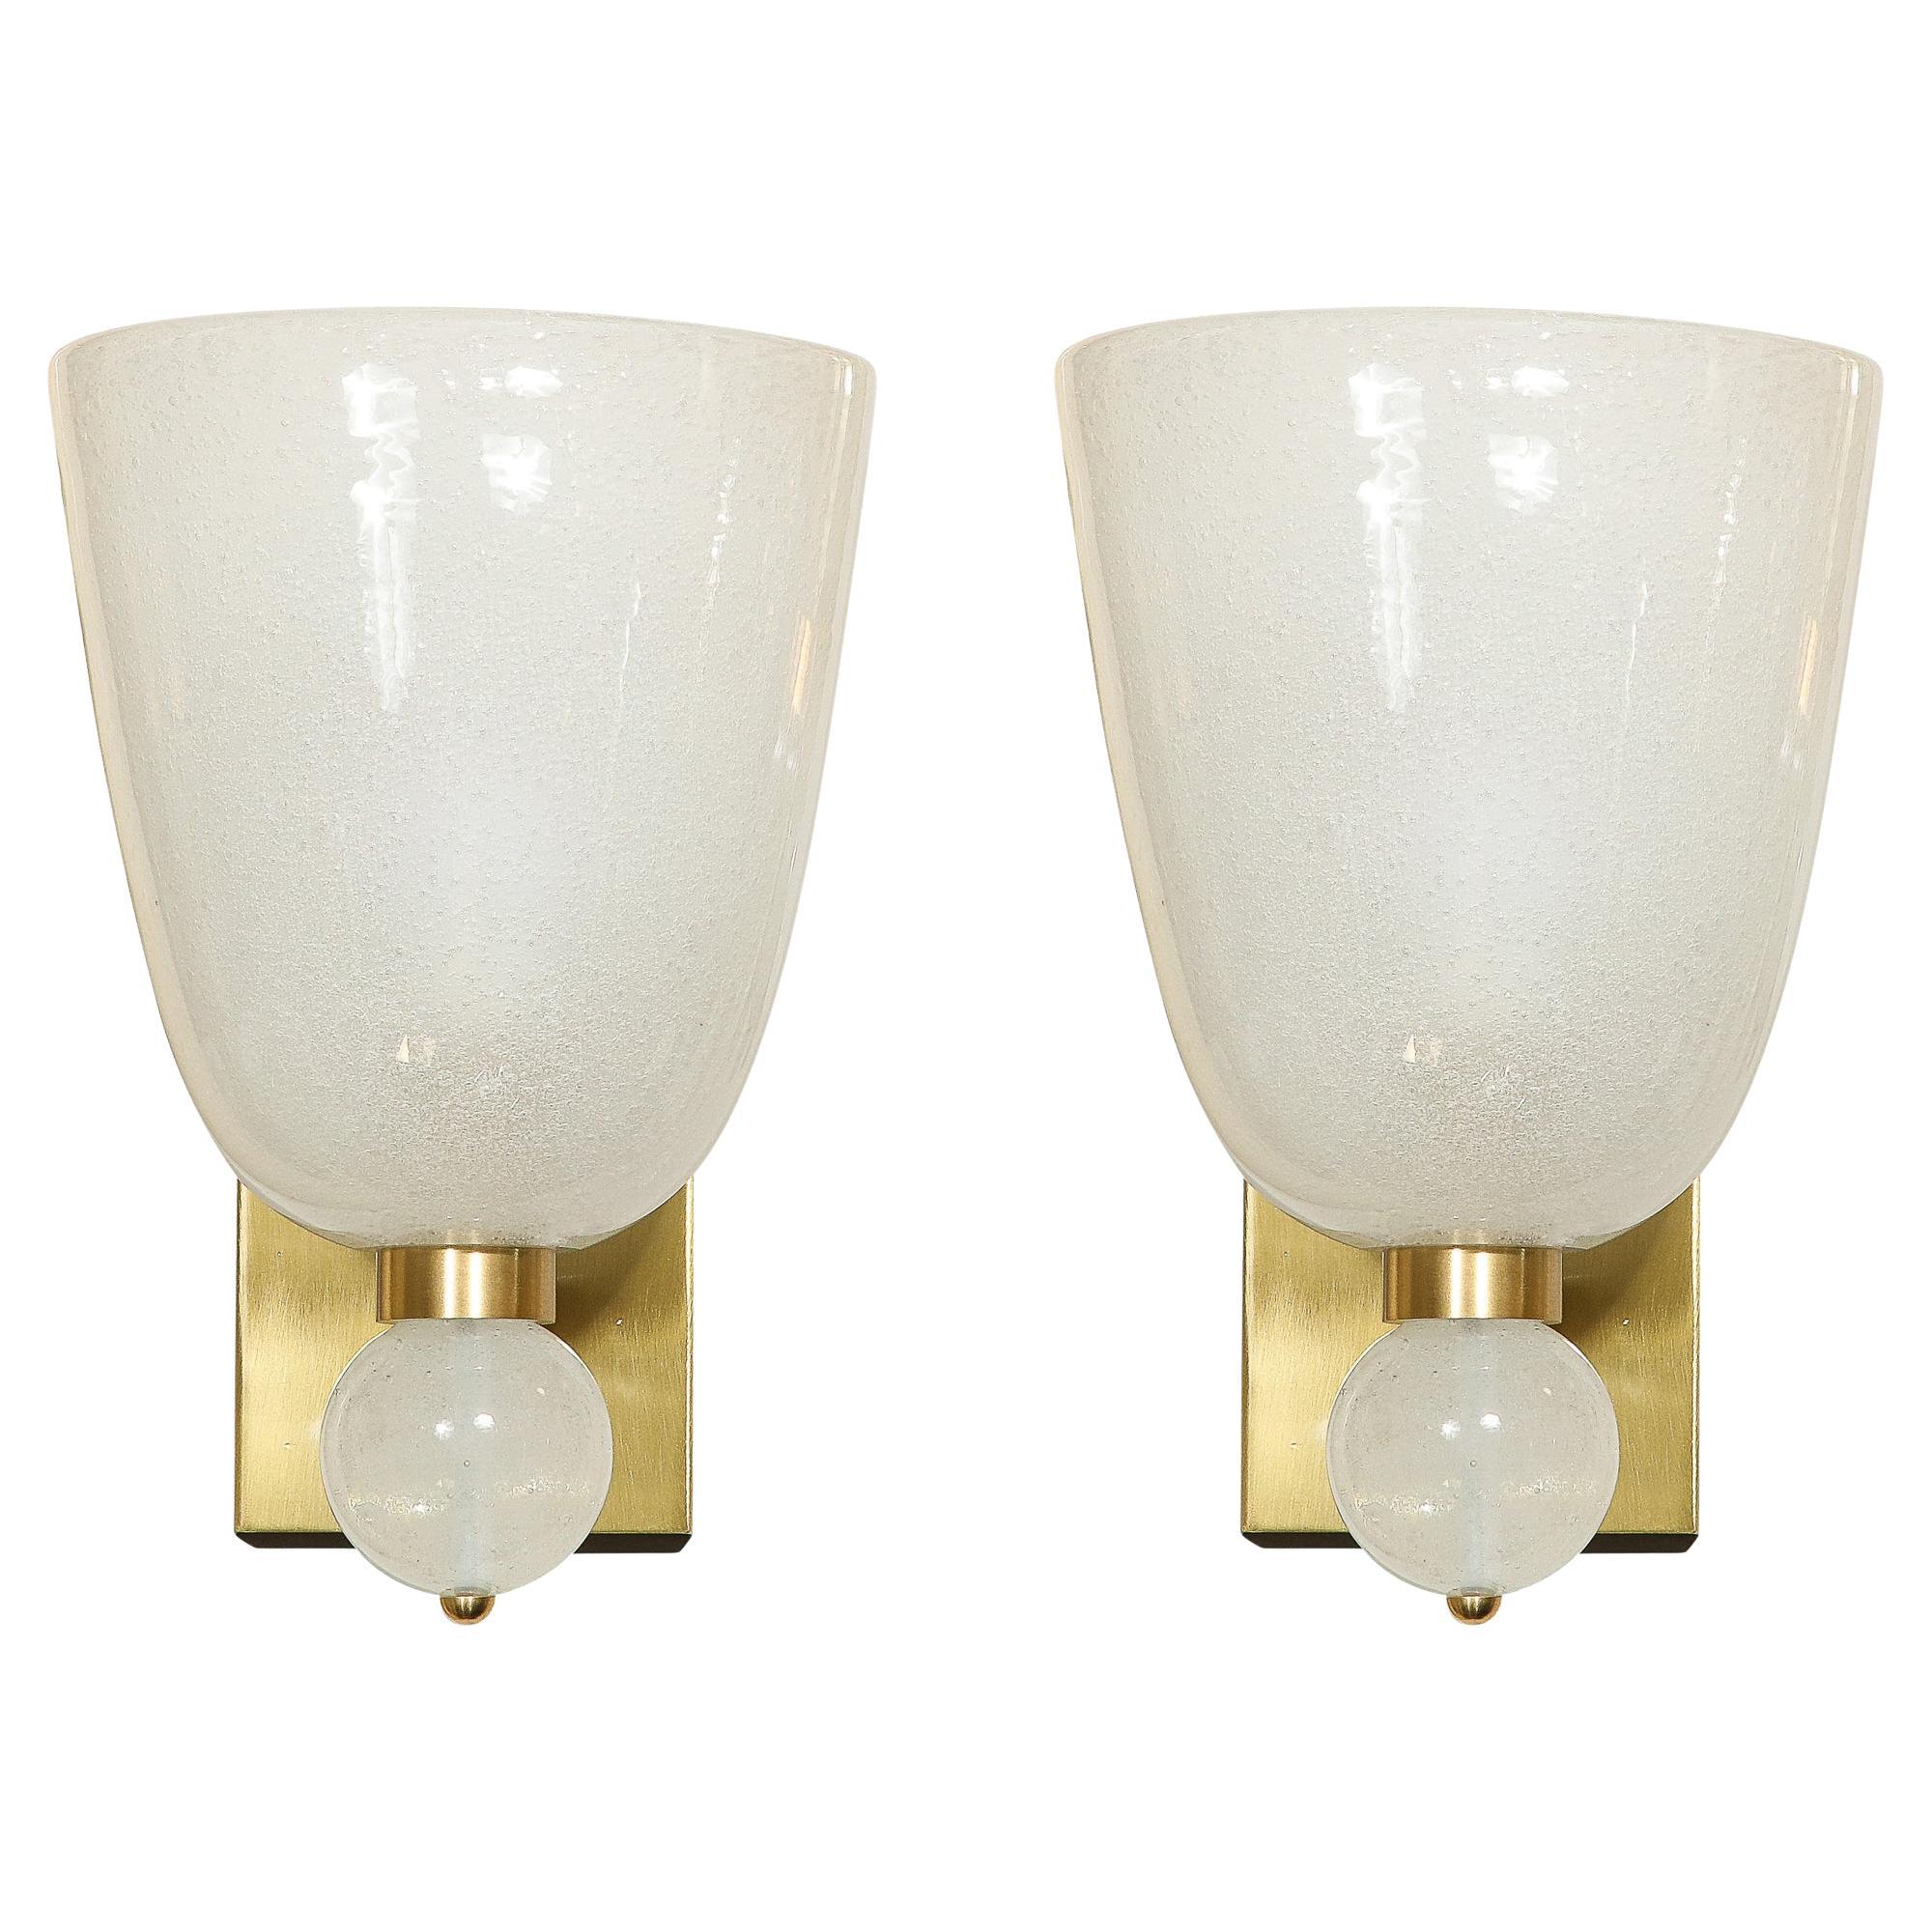 Modernist Hand-Blown Murano Sconces w/ Constellation Murines & Orbital Finial For Sale